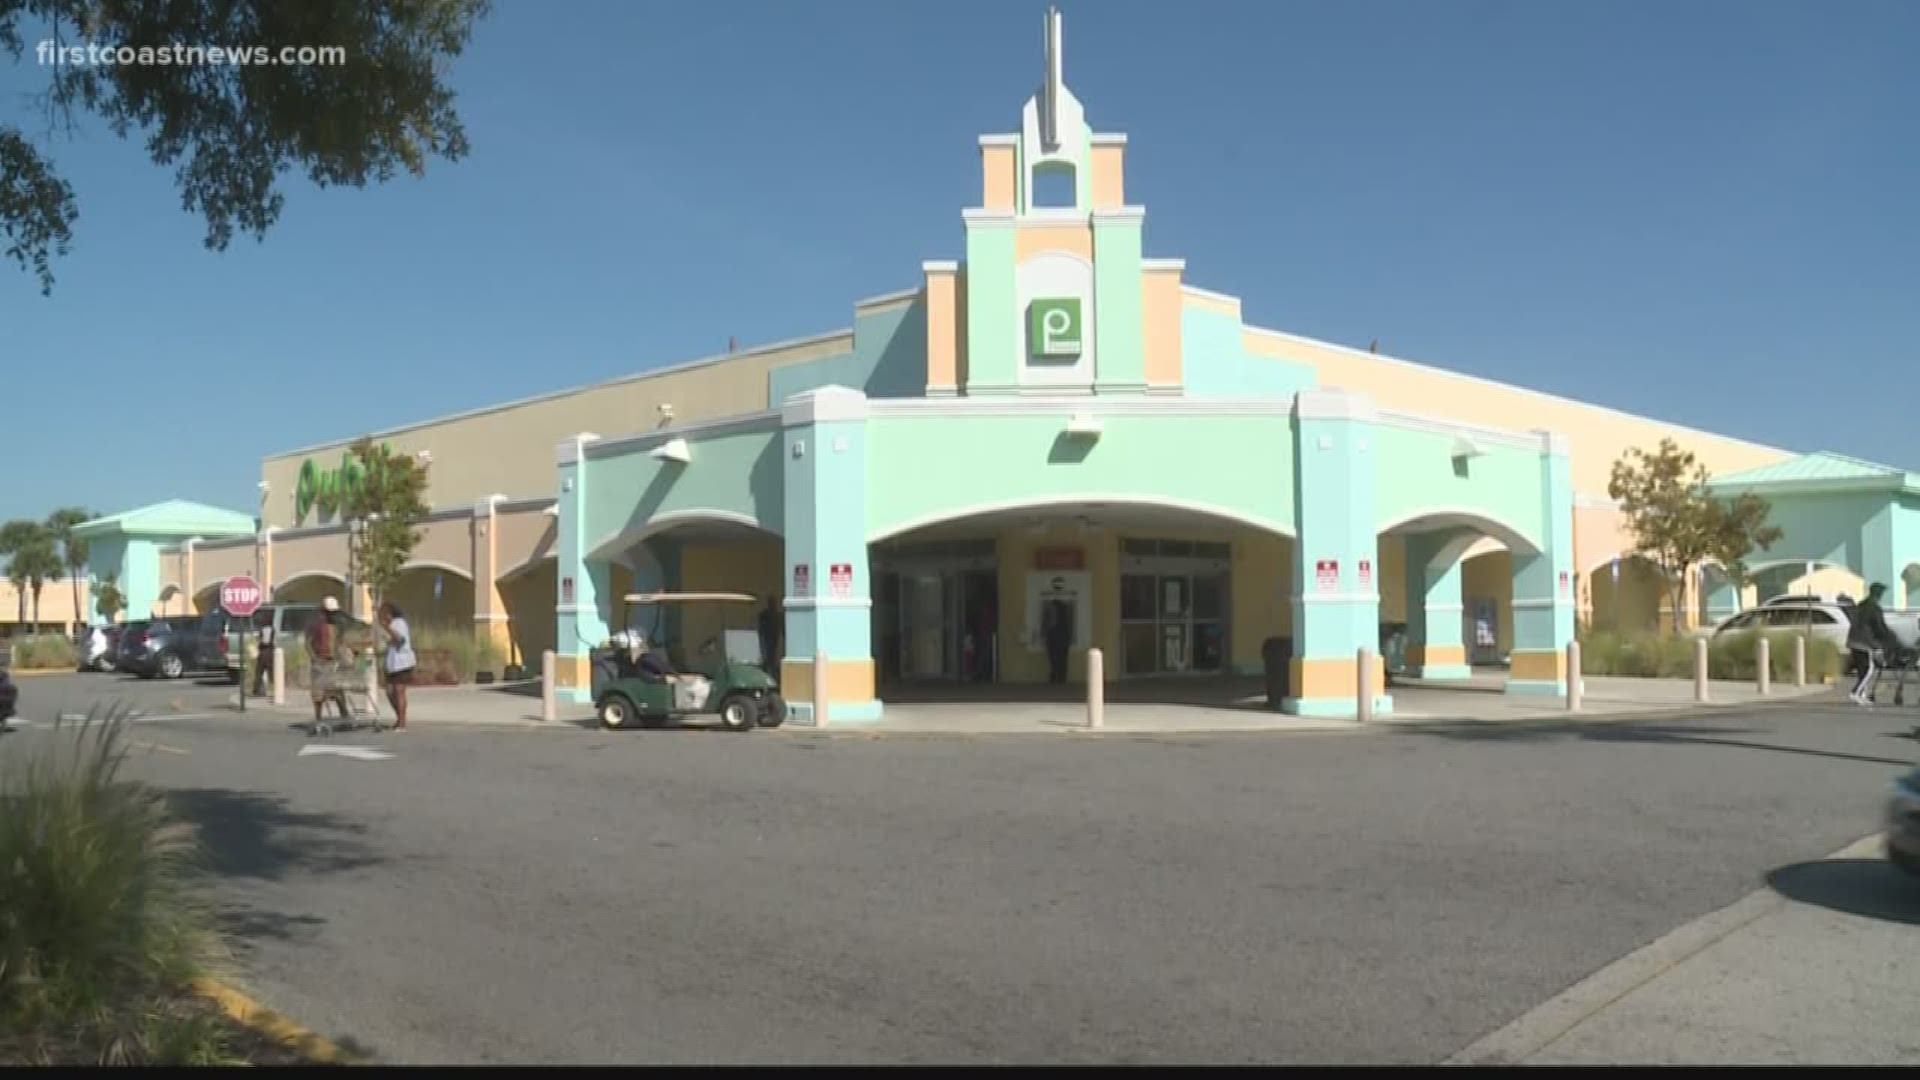 Councilmember Reggie Gaffney announced Wednesday that Winn-Dixie will take over the spot currently occupied by Publix in the Gateway Shopping Center.